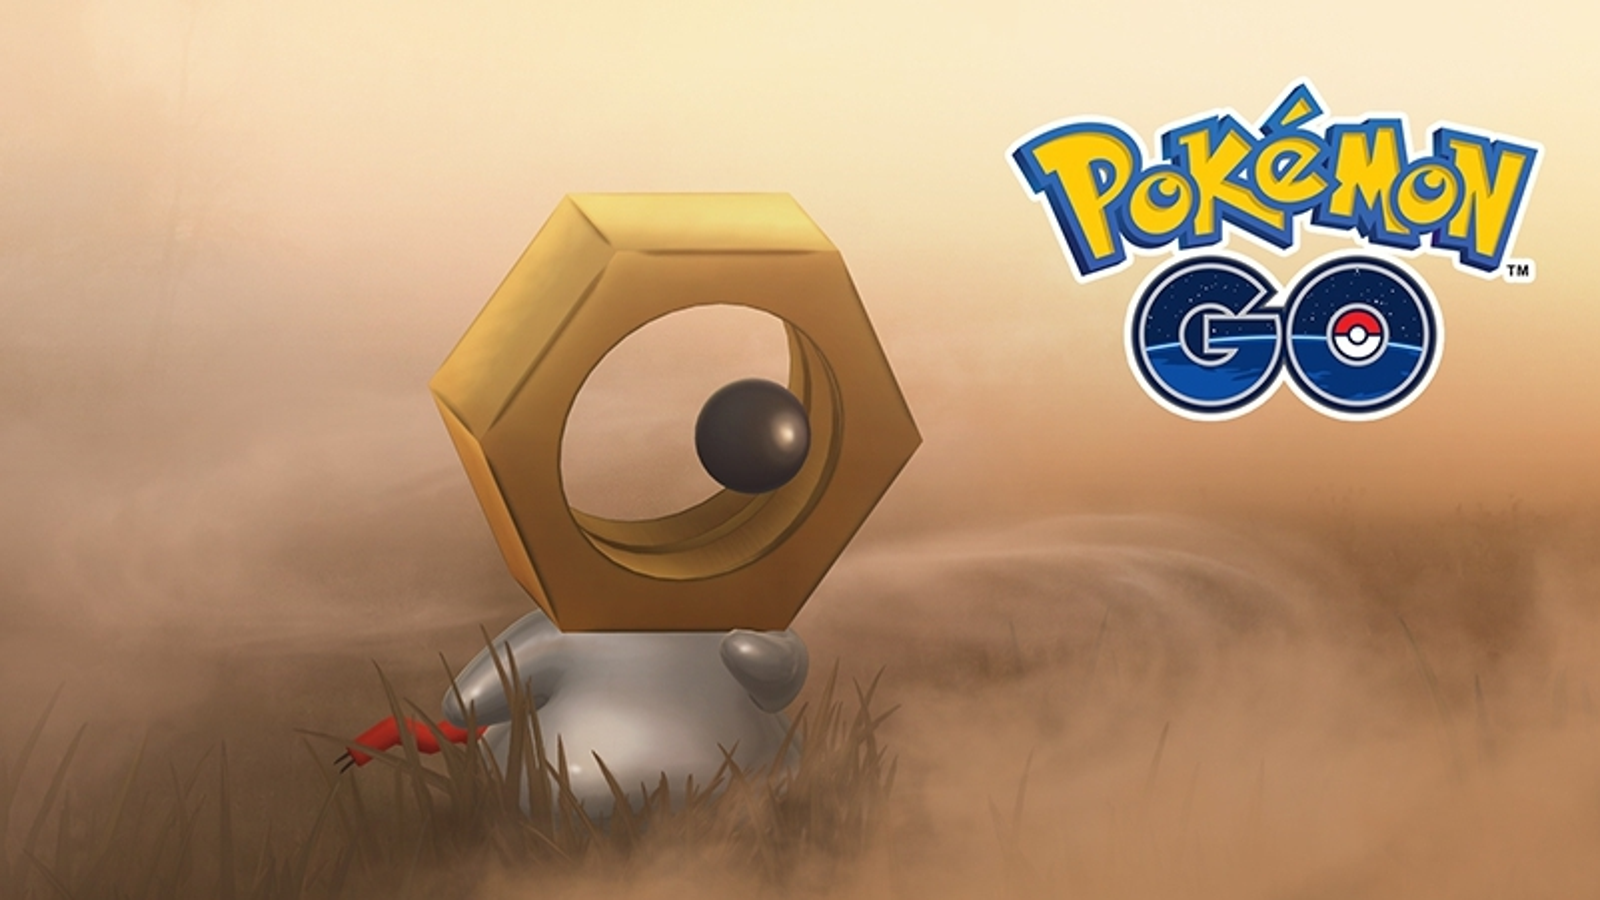 Pokémon Go's mystery event will let you catch all seven Ultra